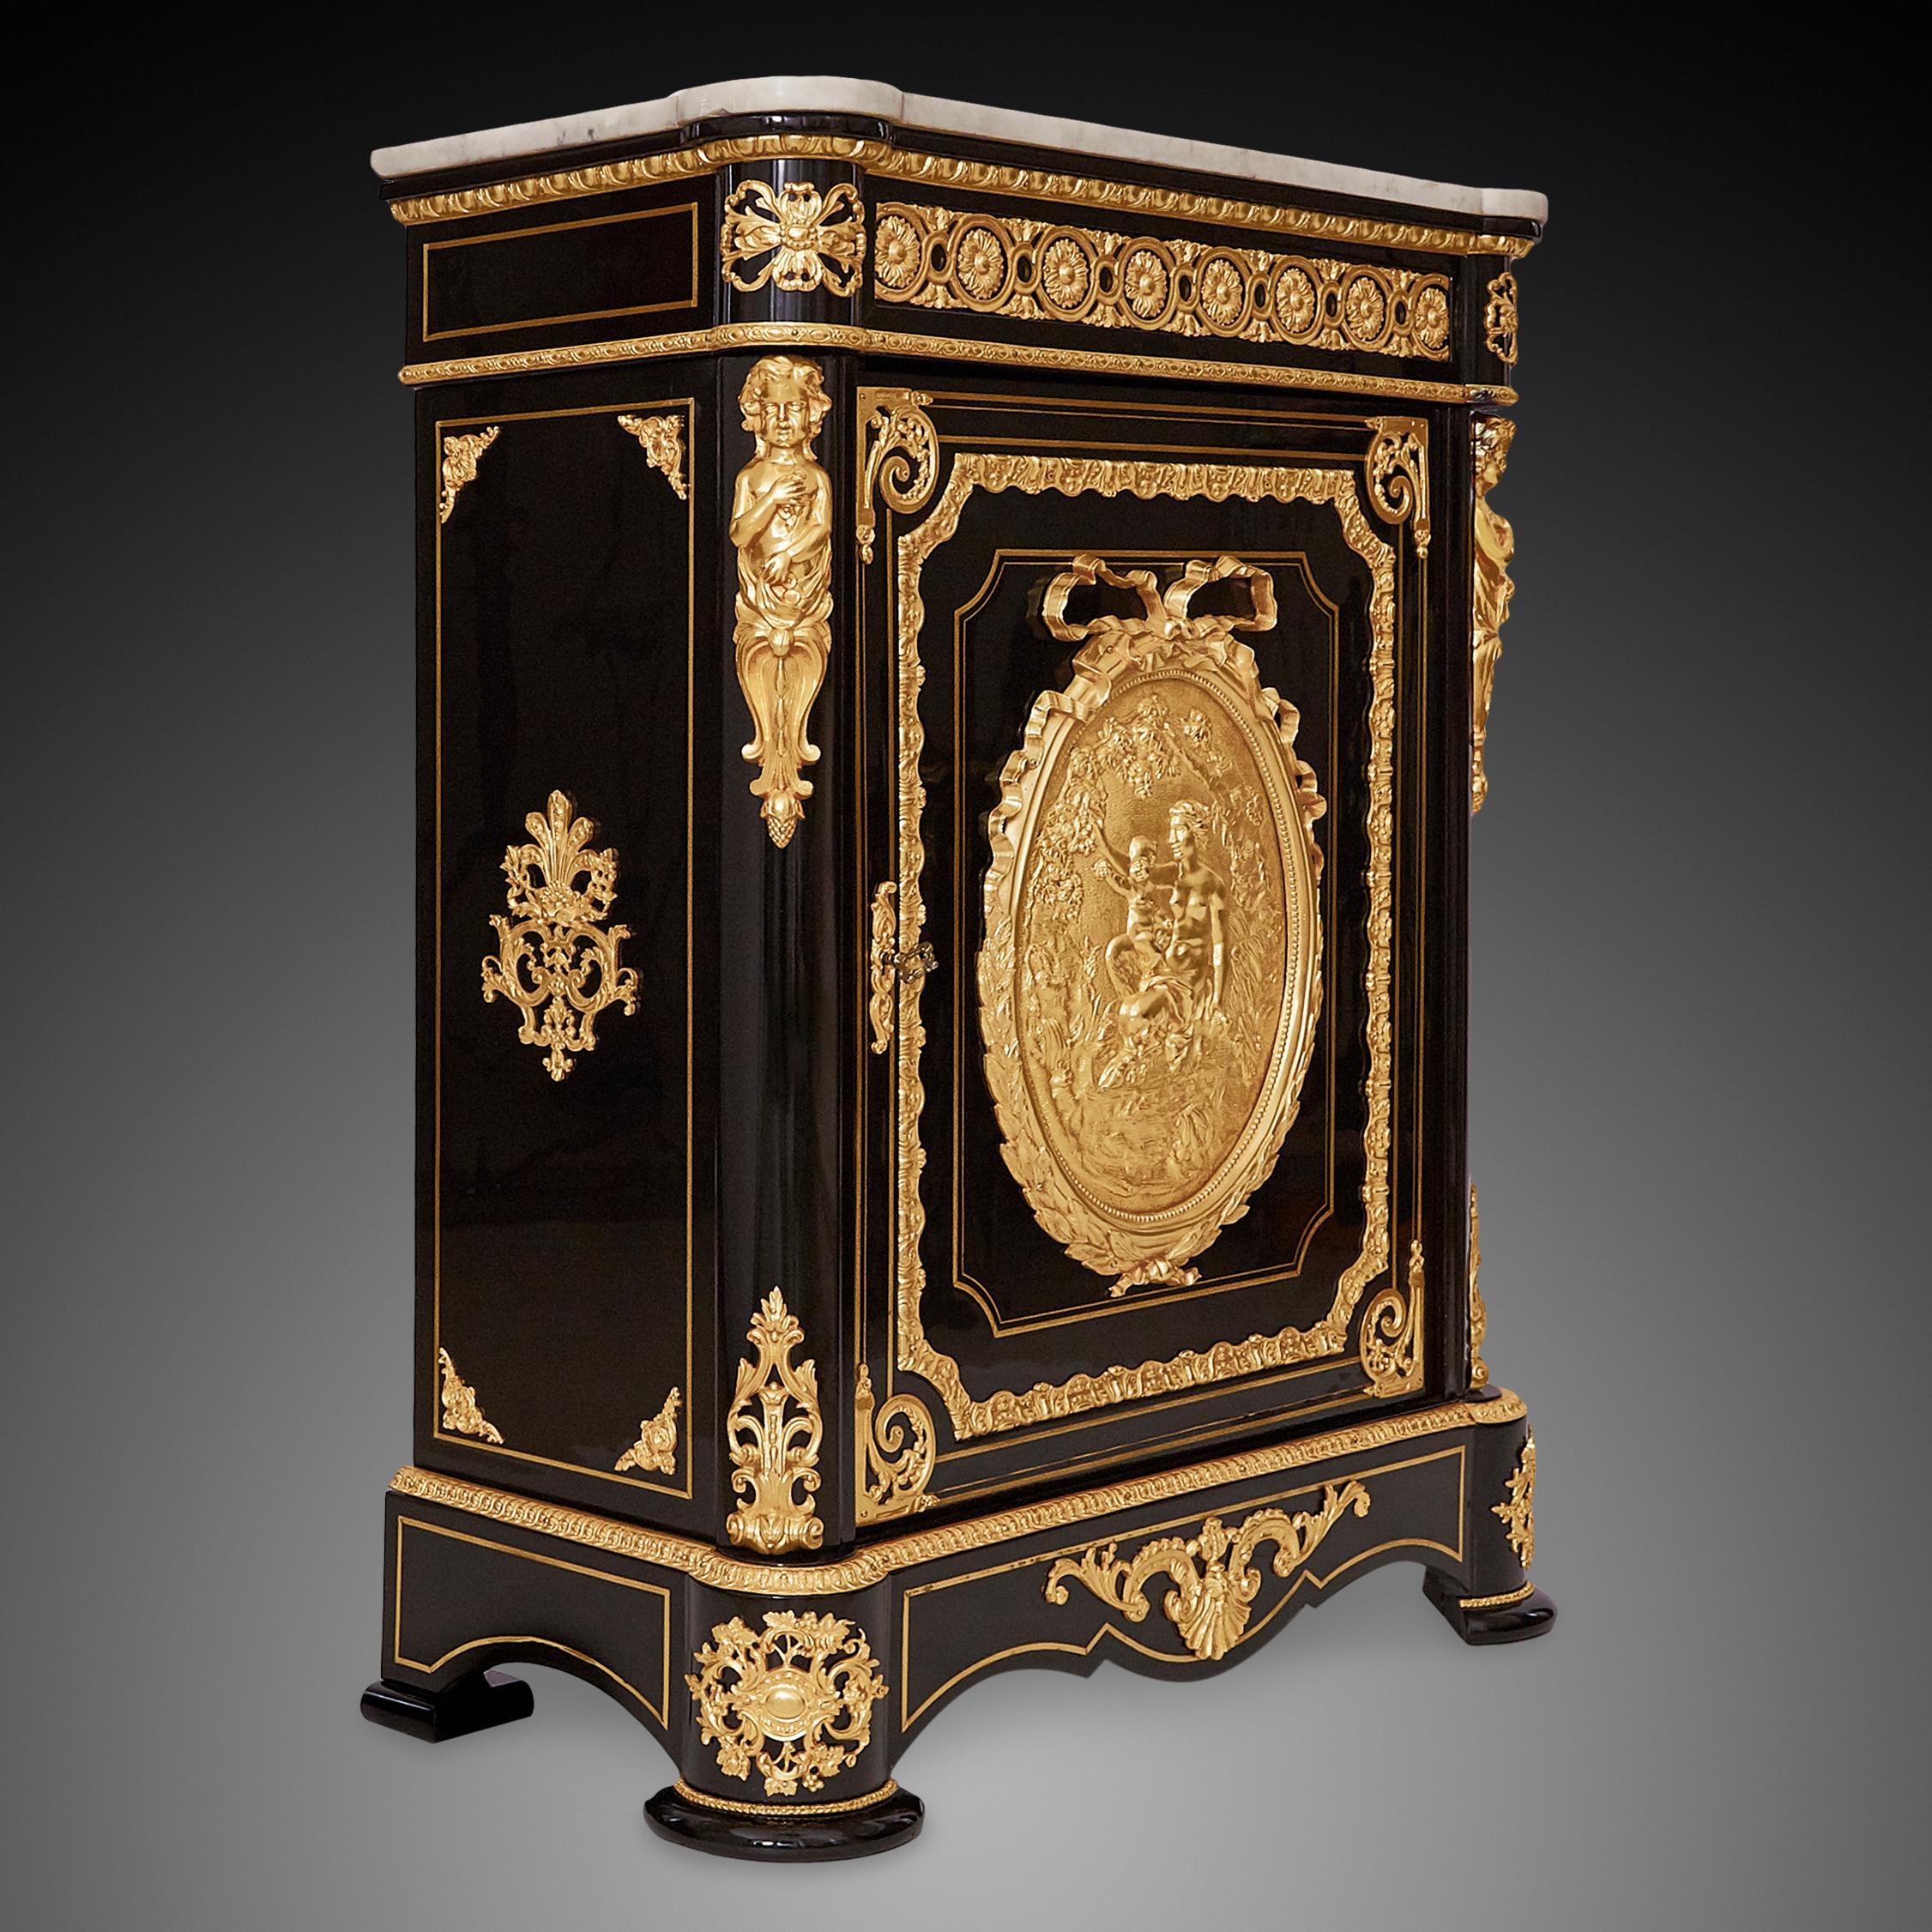 Commode of French 19th Century Napoleon III Period. Perfect condition, renovated according to the museum's procedures.